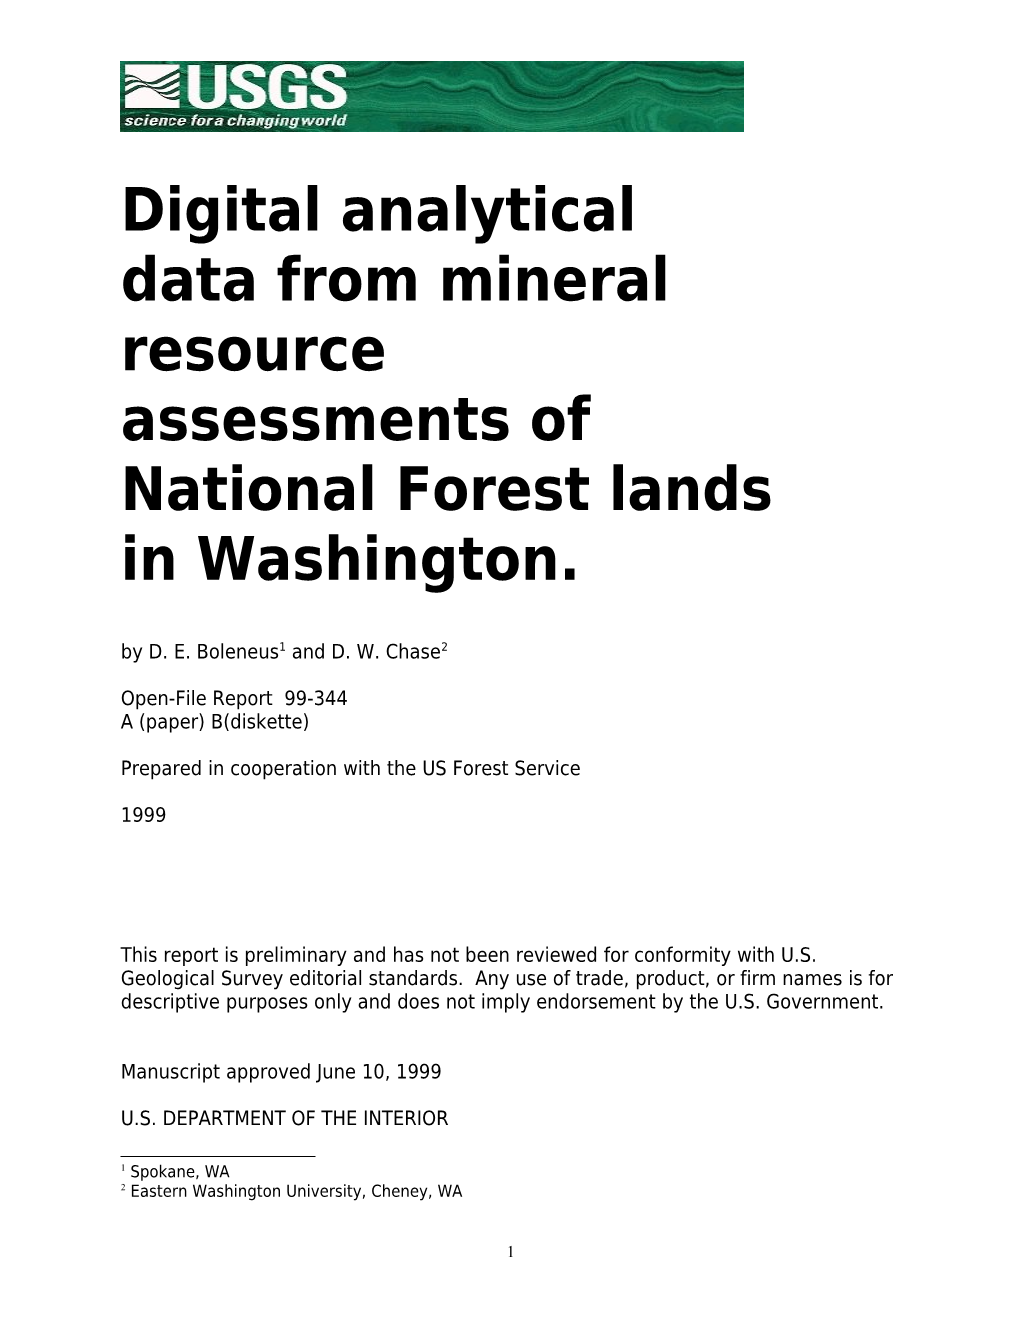 Digital Analytical Data from Mineral Resource Assessments of National Forest Lands In